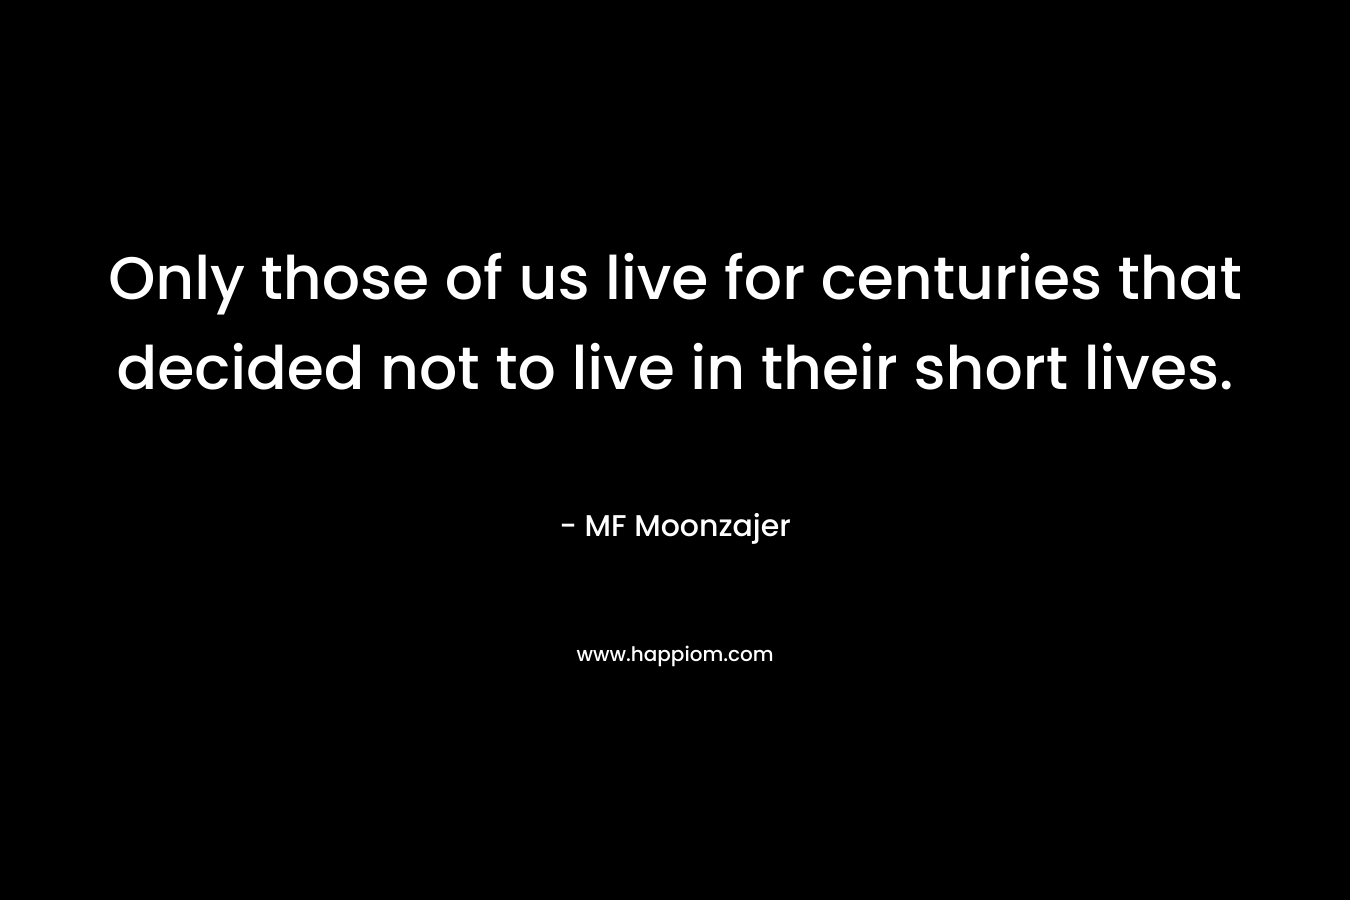 Only those of us live for centuries that decided not to live in their short lives. – MF Moonzajer